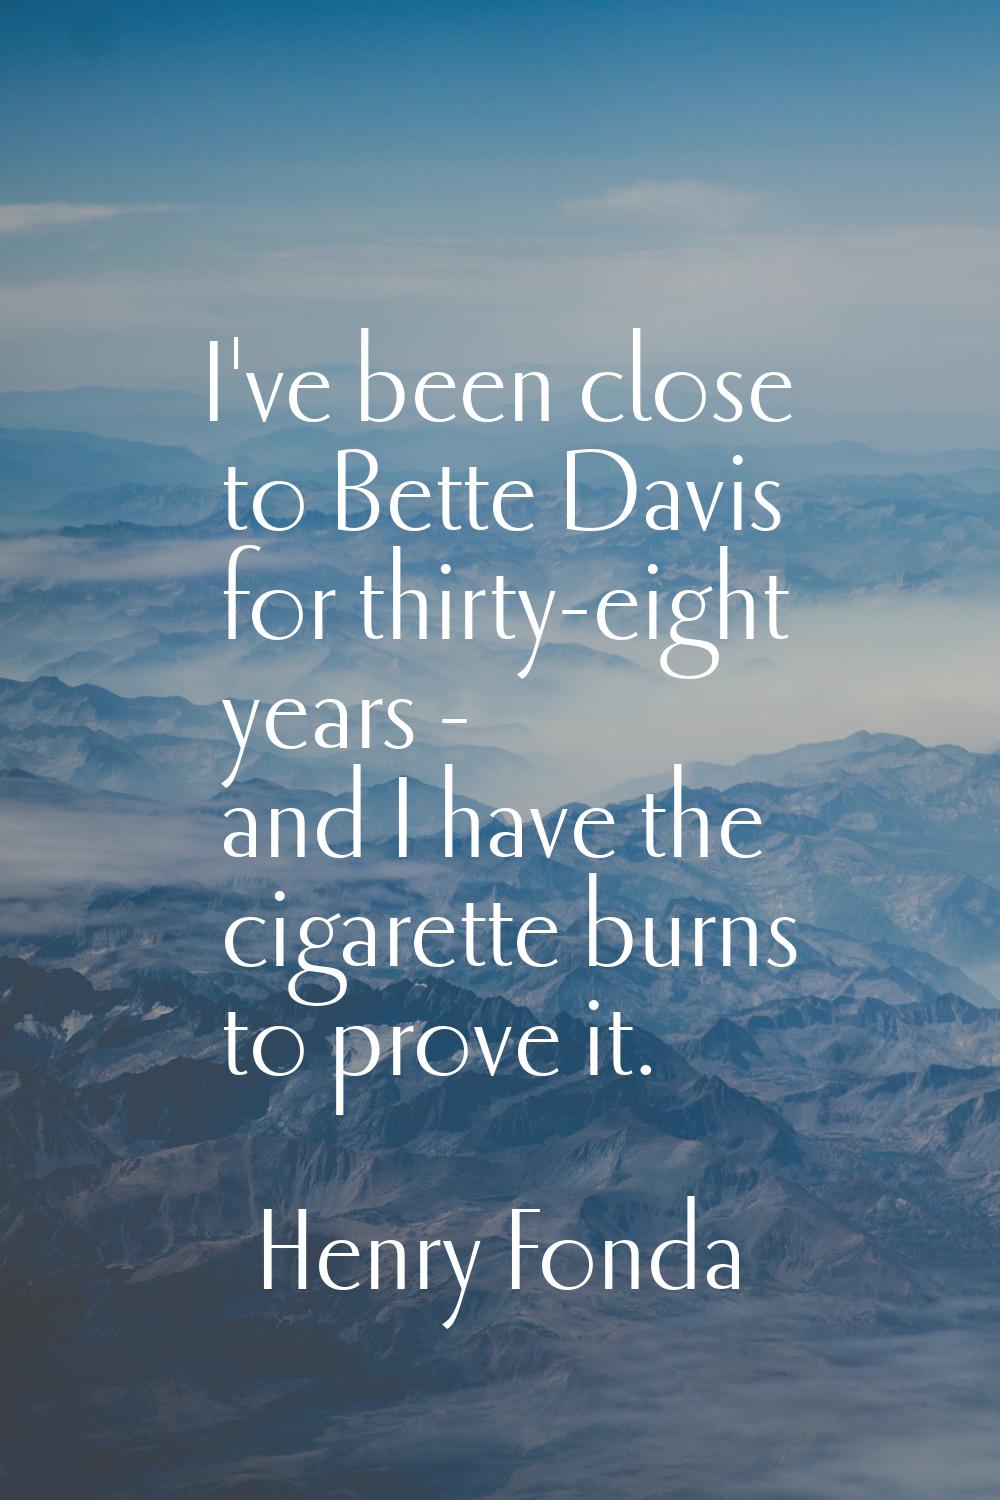 I've been close to Bette Davis for thirty-eight years - and I have the cigarette burns to prove it.